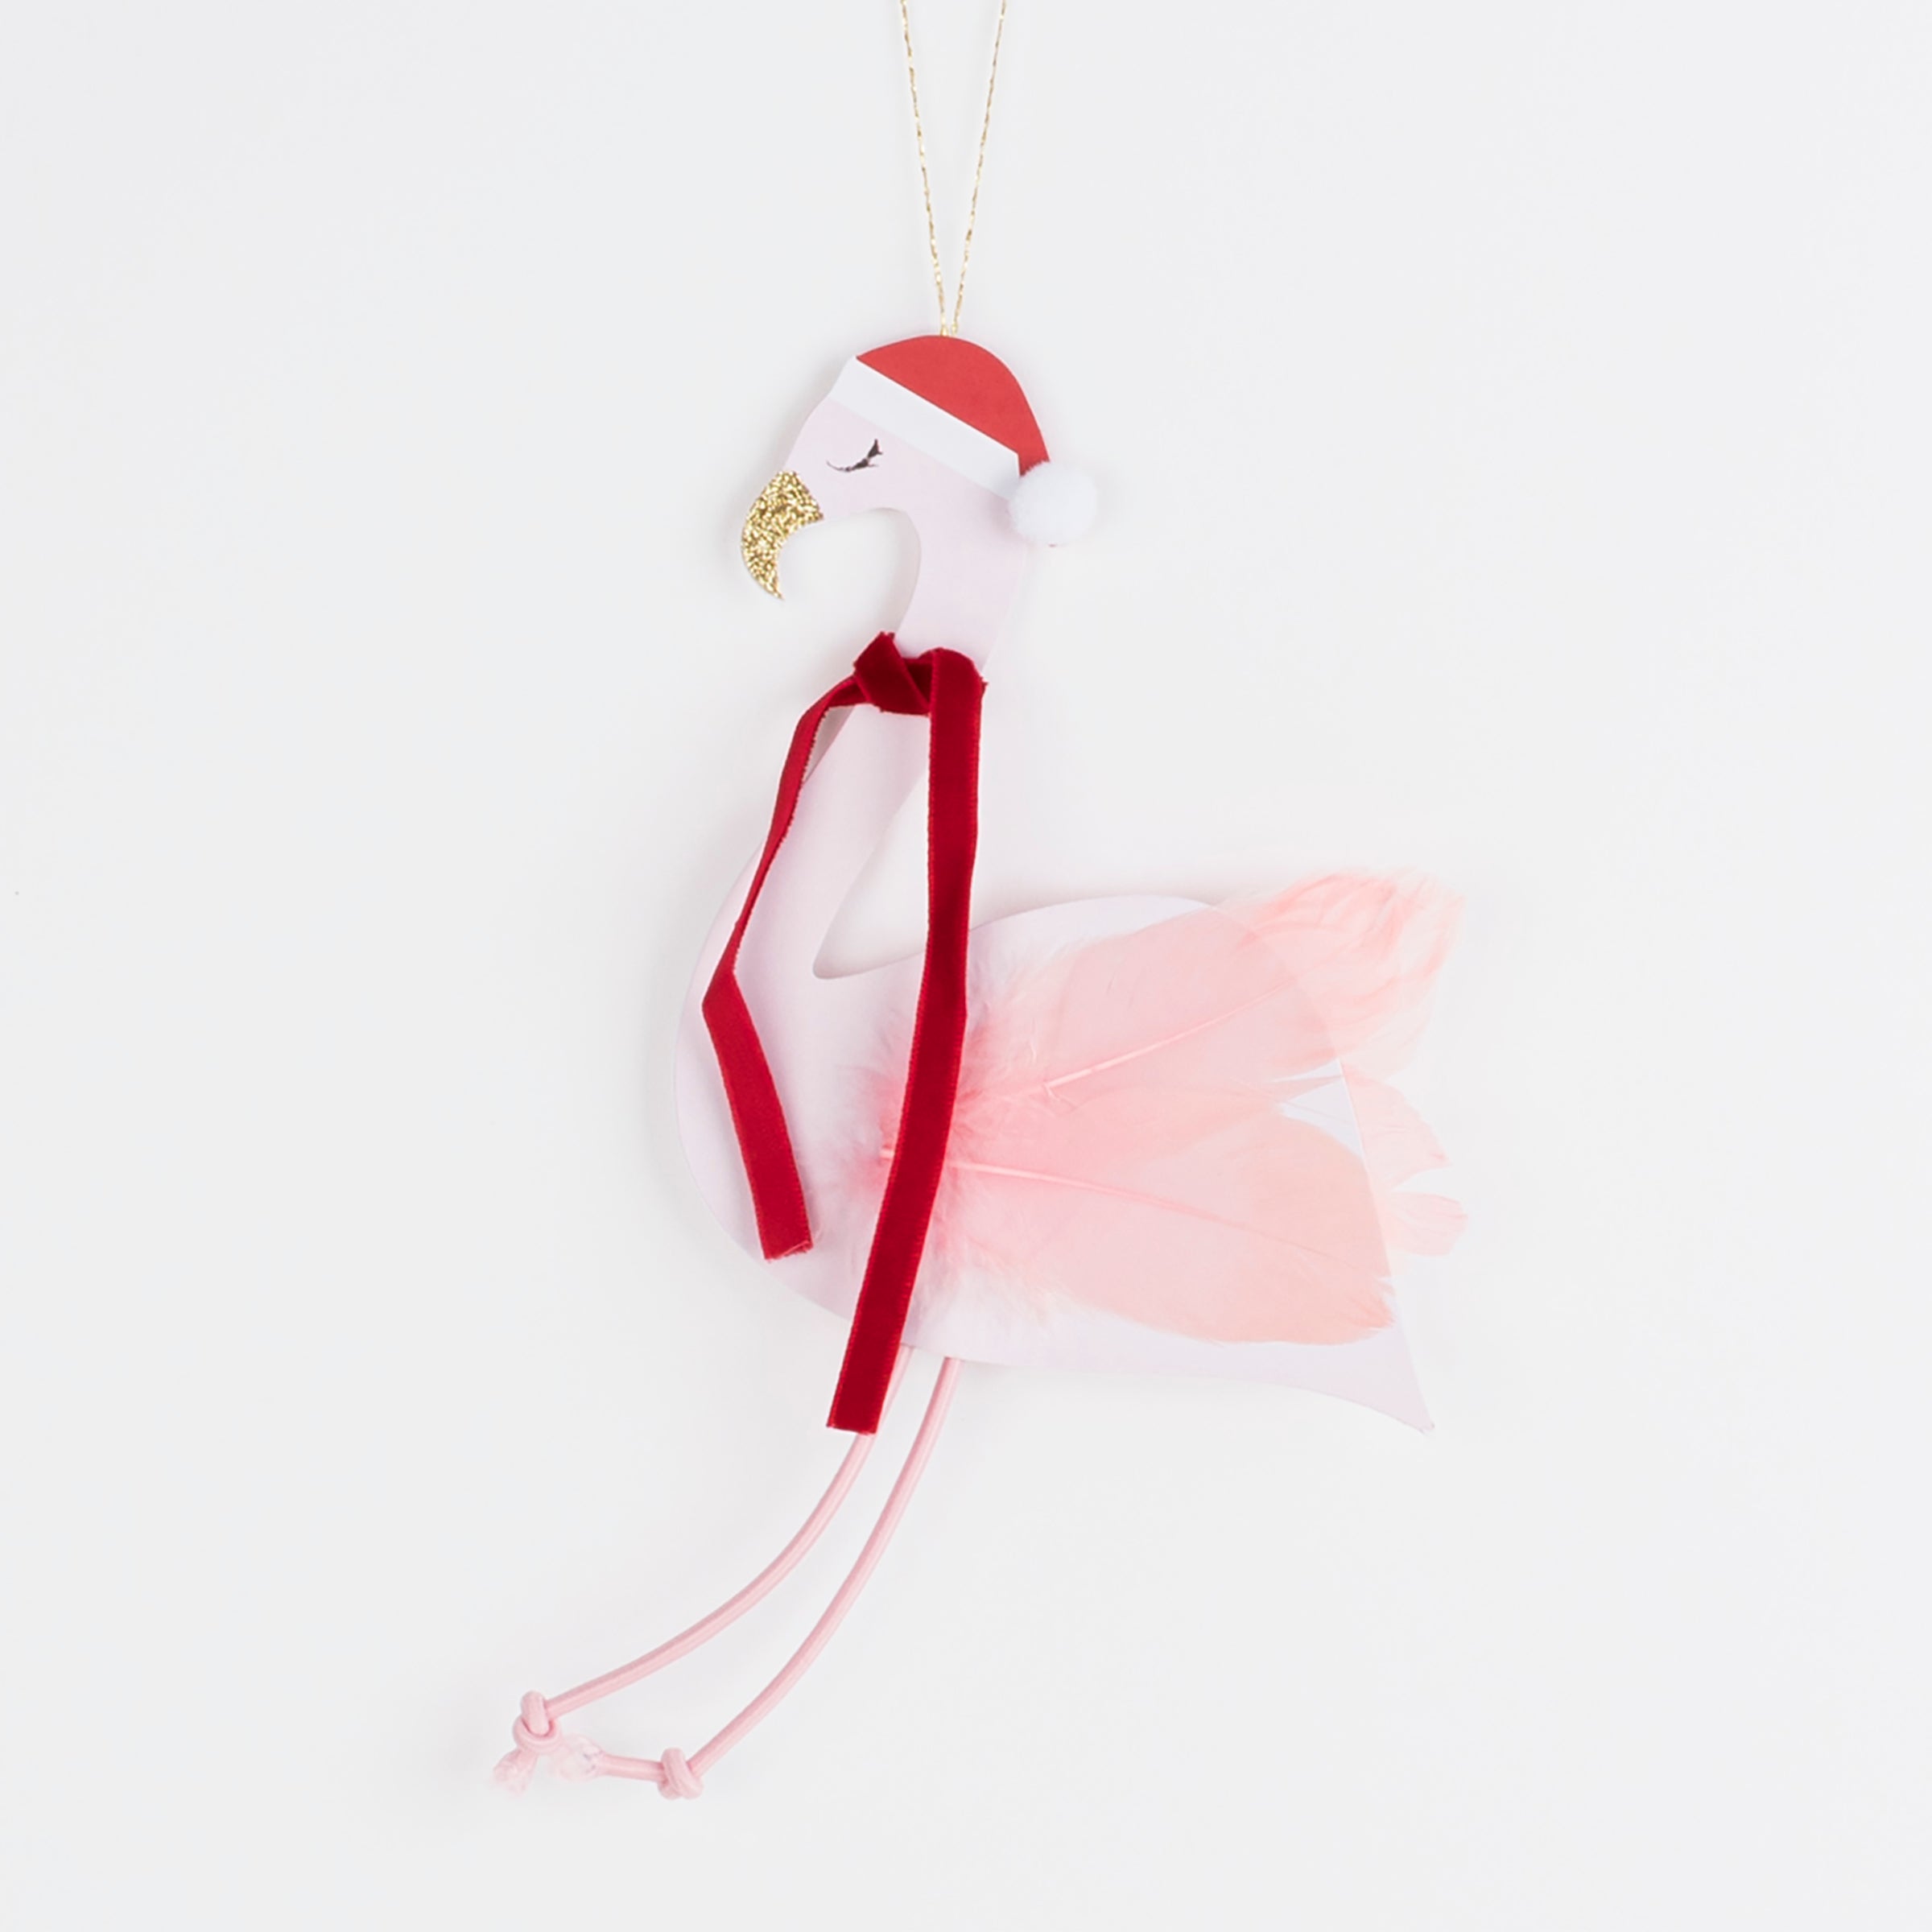 This wonderful card doubles up as a flamingo Christmas decoration, with a pompom, velvet ribbon, pink feathers and pink cord details.